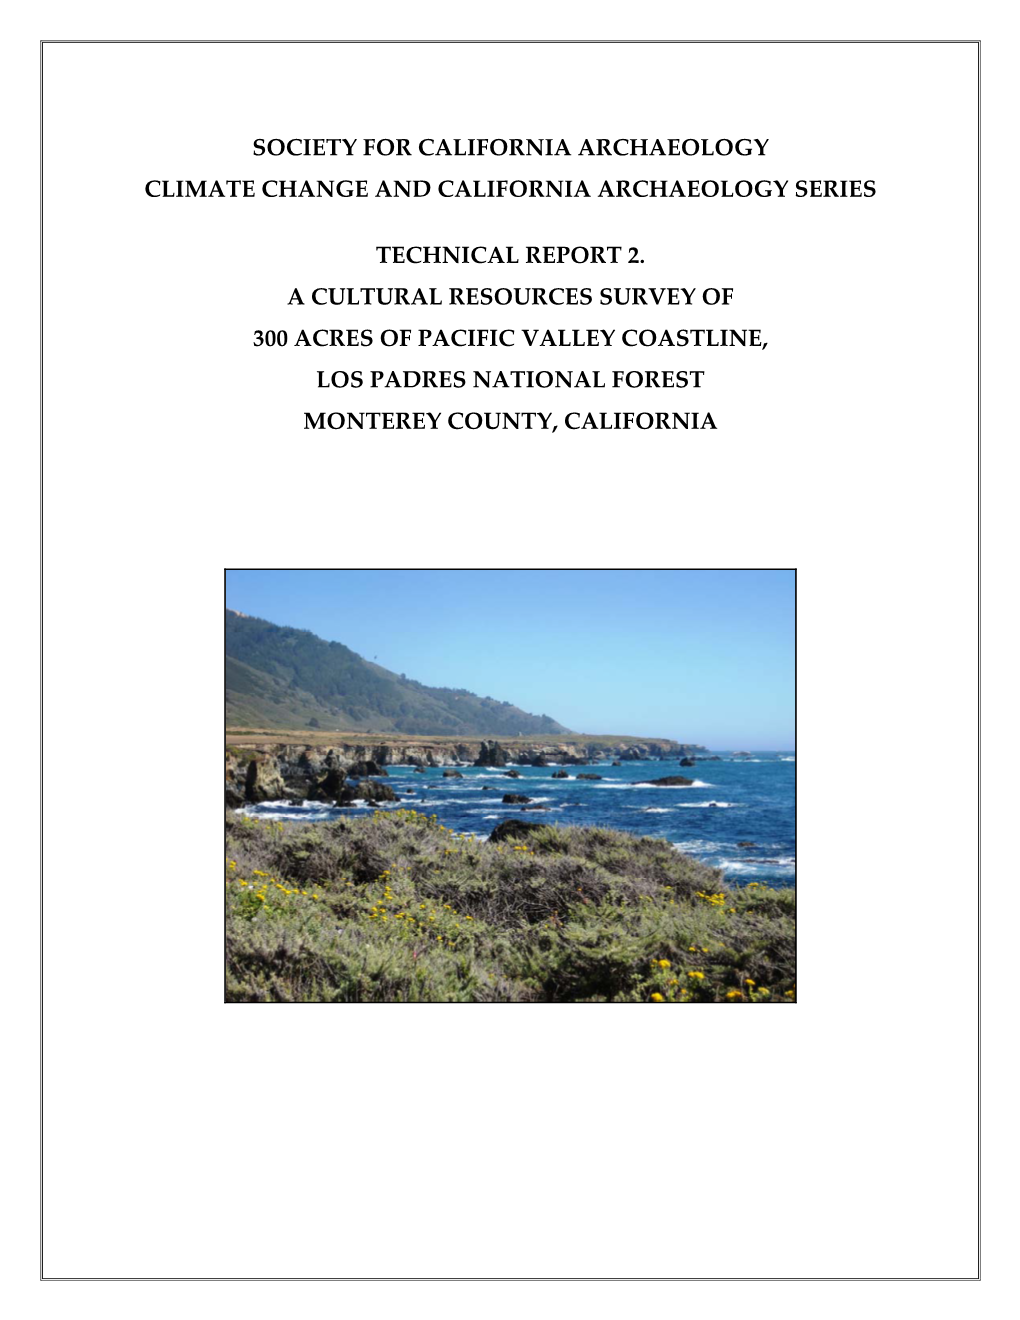 Technical Report 2. a Cultural Resources Survey of 300 Acres of Pacific Valley Coastline, Los Padres National Forest Monterey County, California